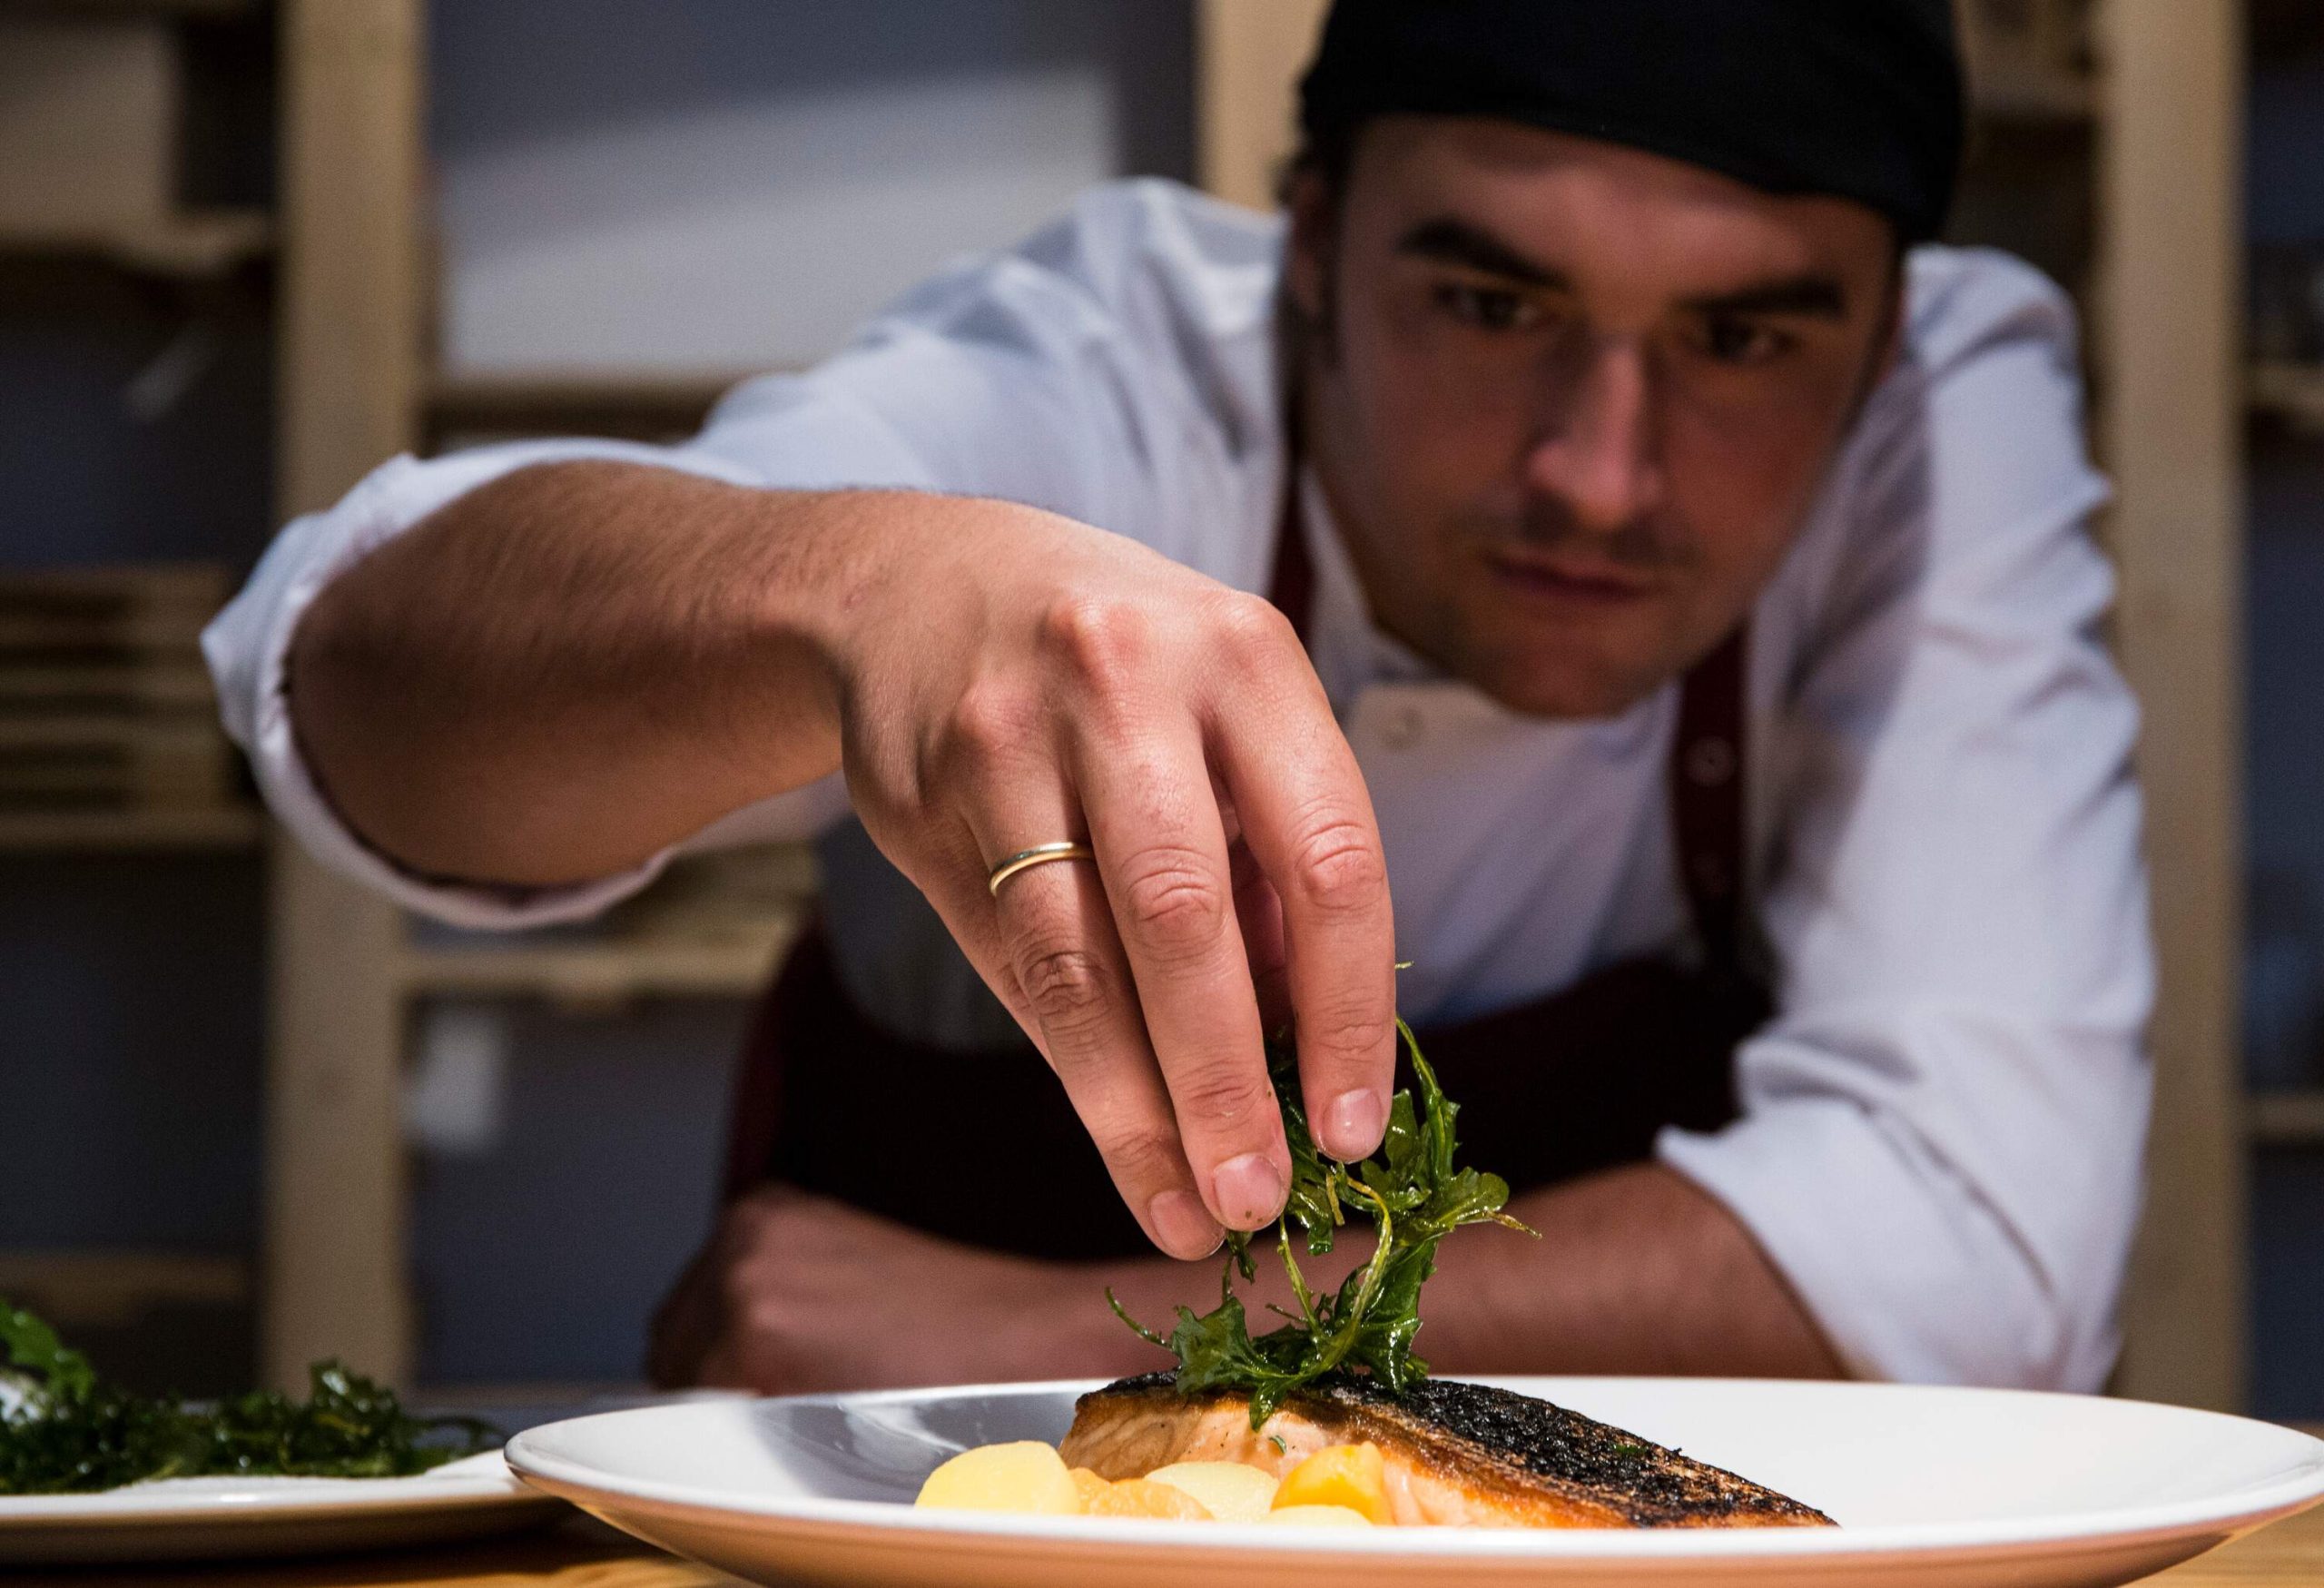 A male chef garnishes the slice of salmon with sauteed green leaves.